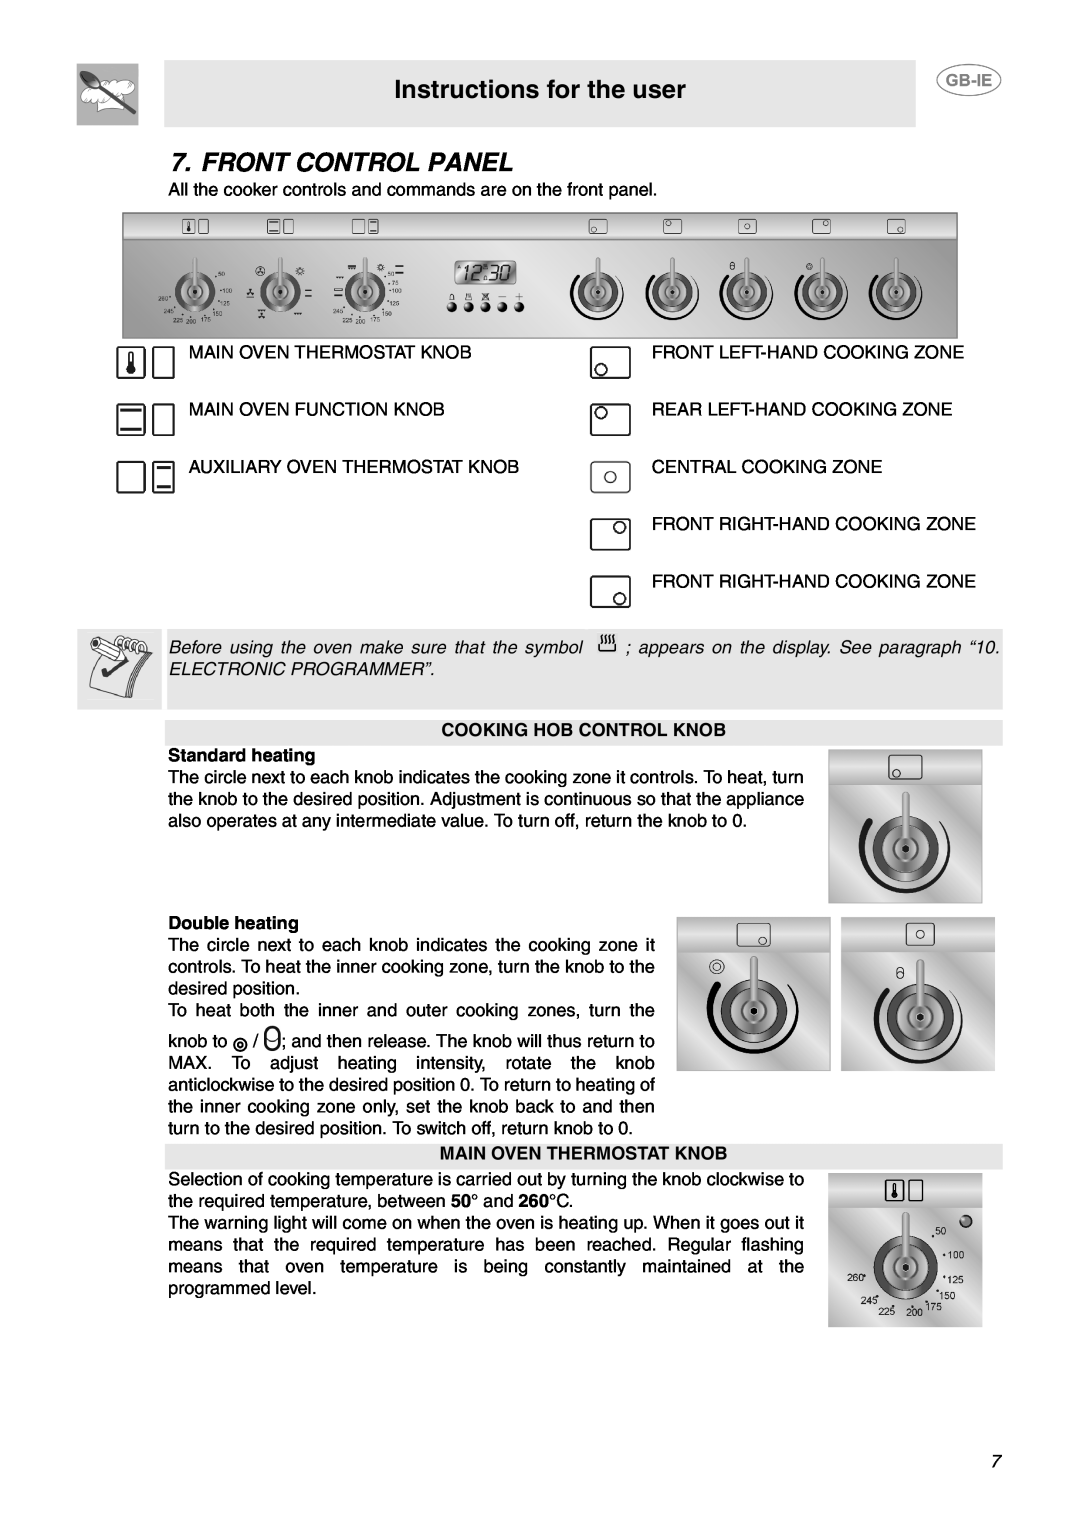 Smeg SUK92CMX5 Front Control Panel, Instructions for the user, COOKING HOB CONTROL KNOB Standard heating, Double heating 